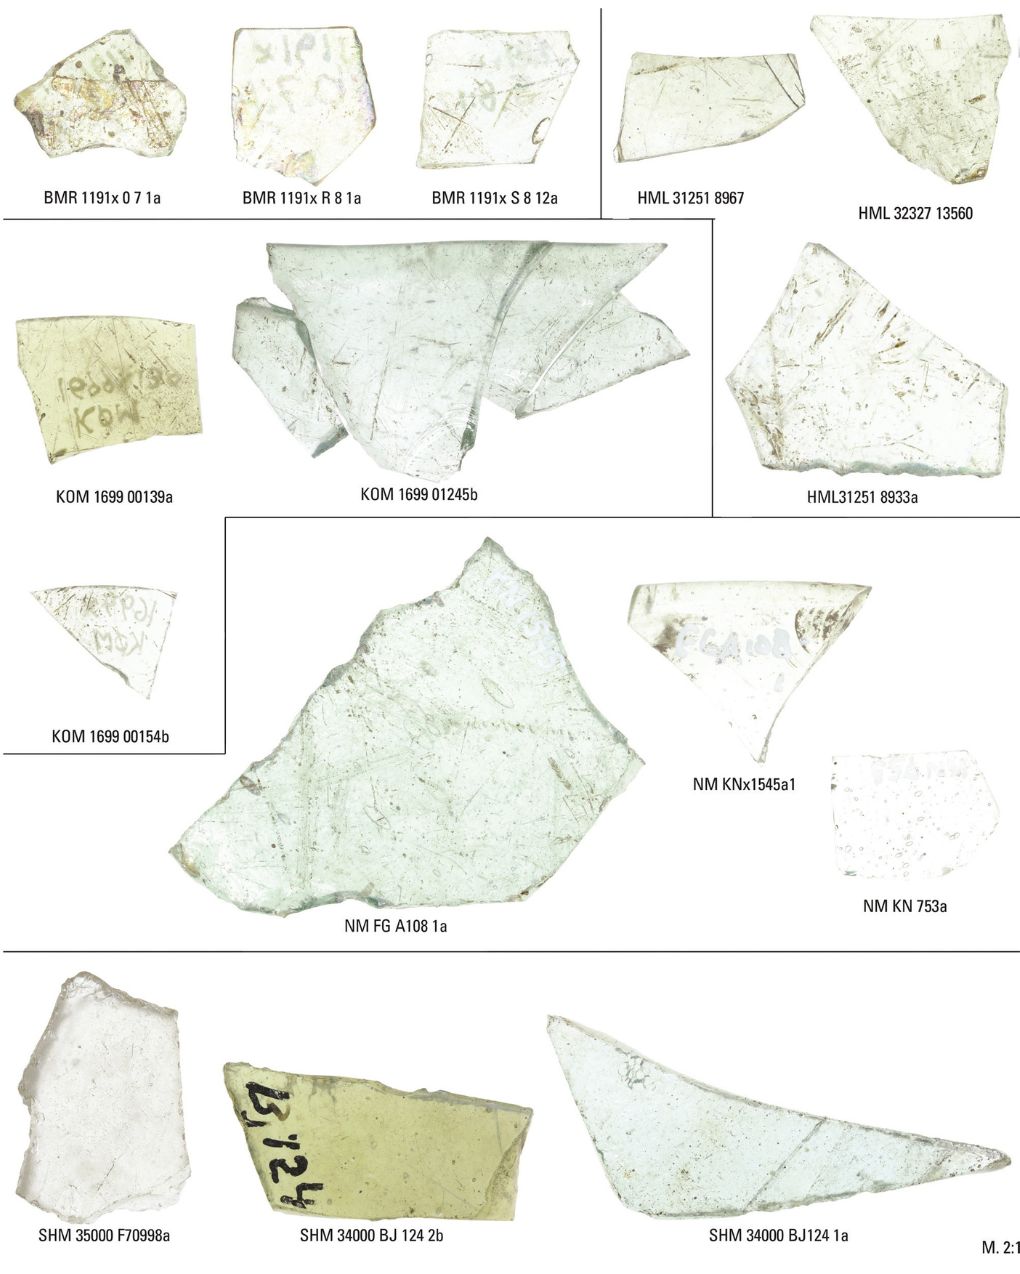 Window glass fragments found at Viking sites. Photo: National Museum of Denmark.